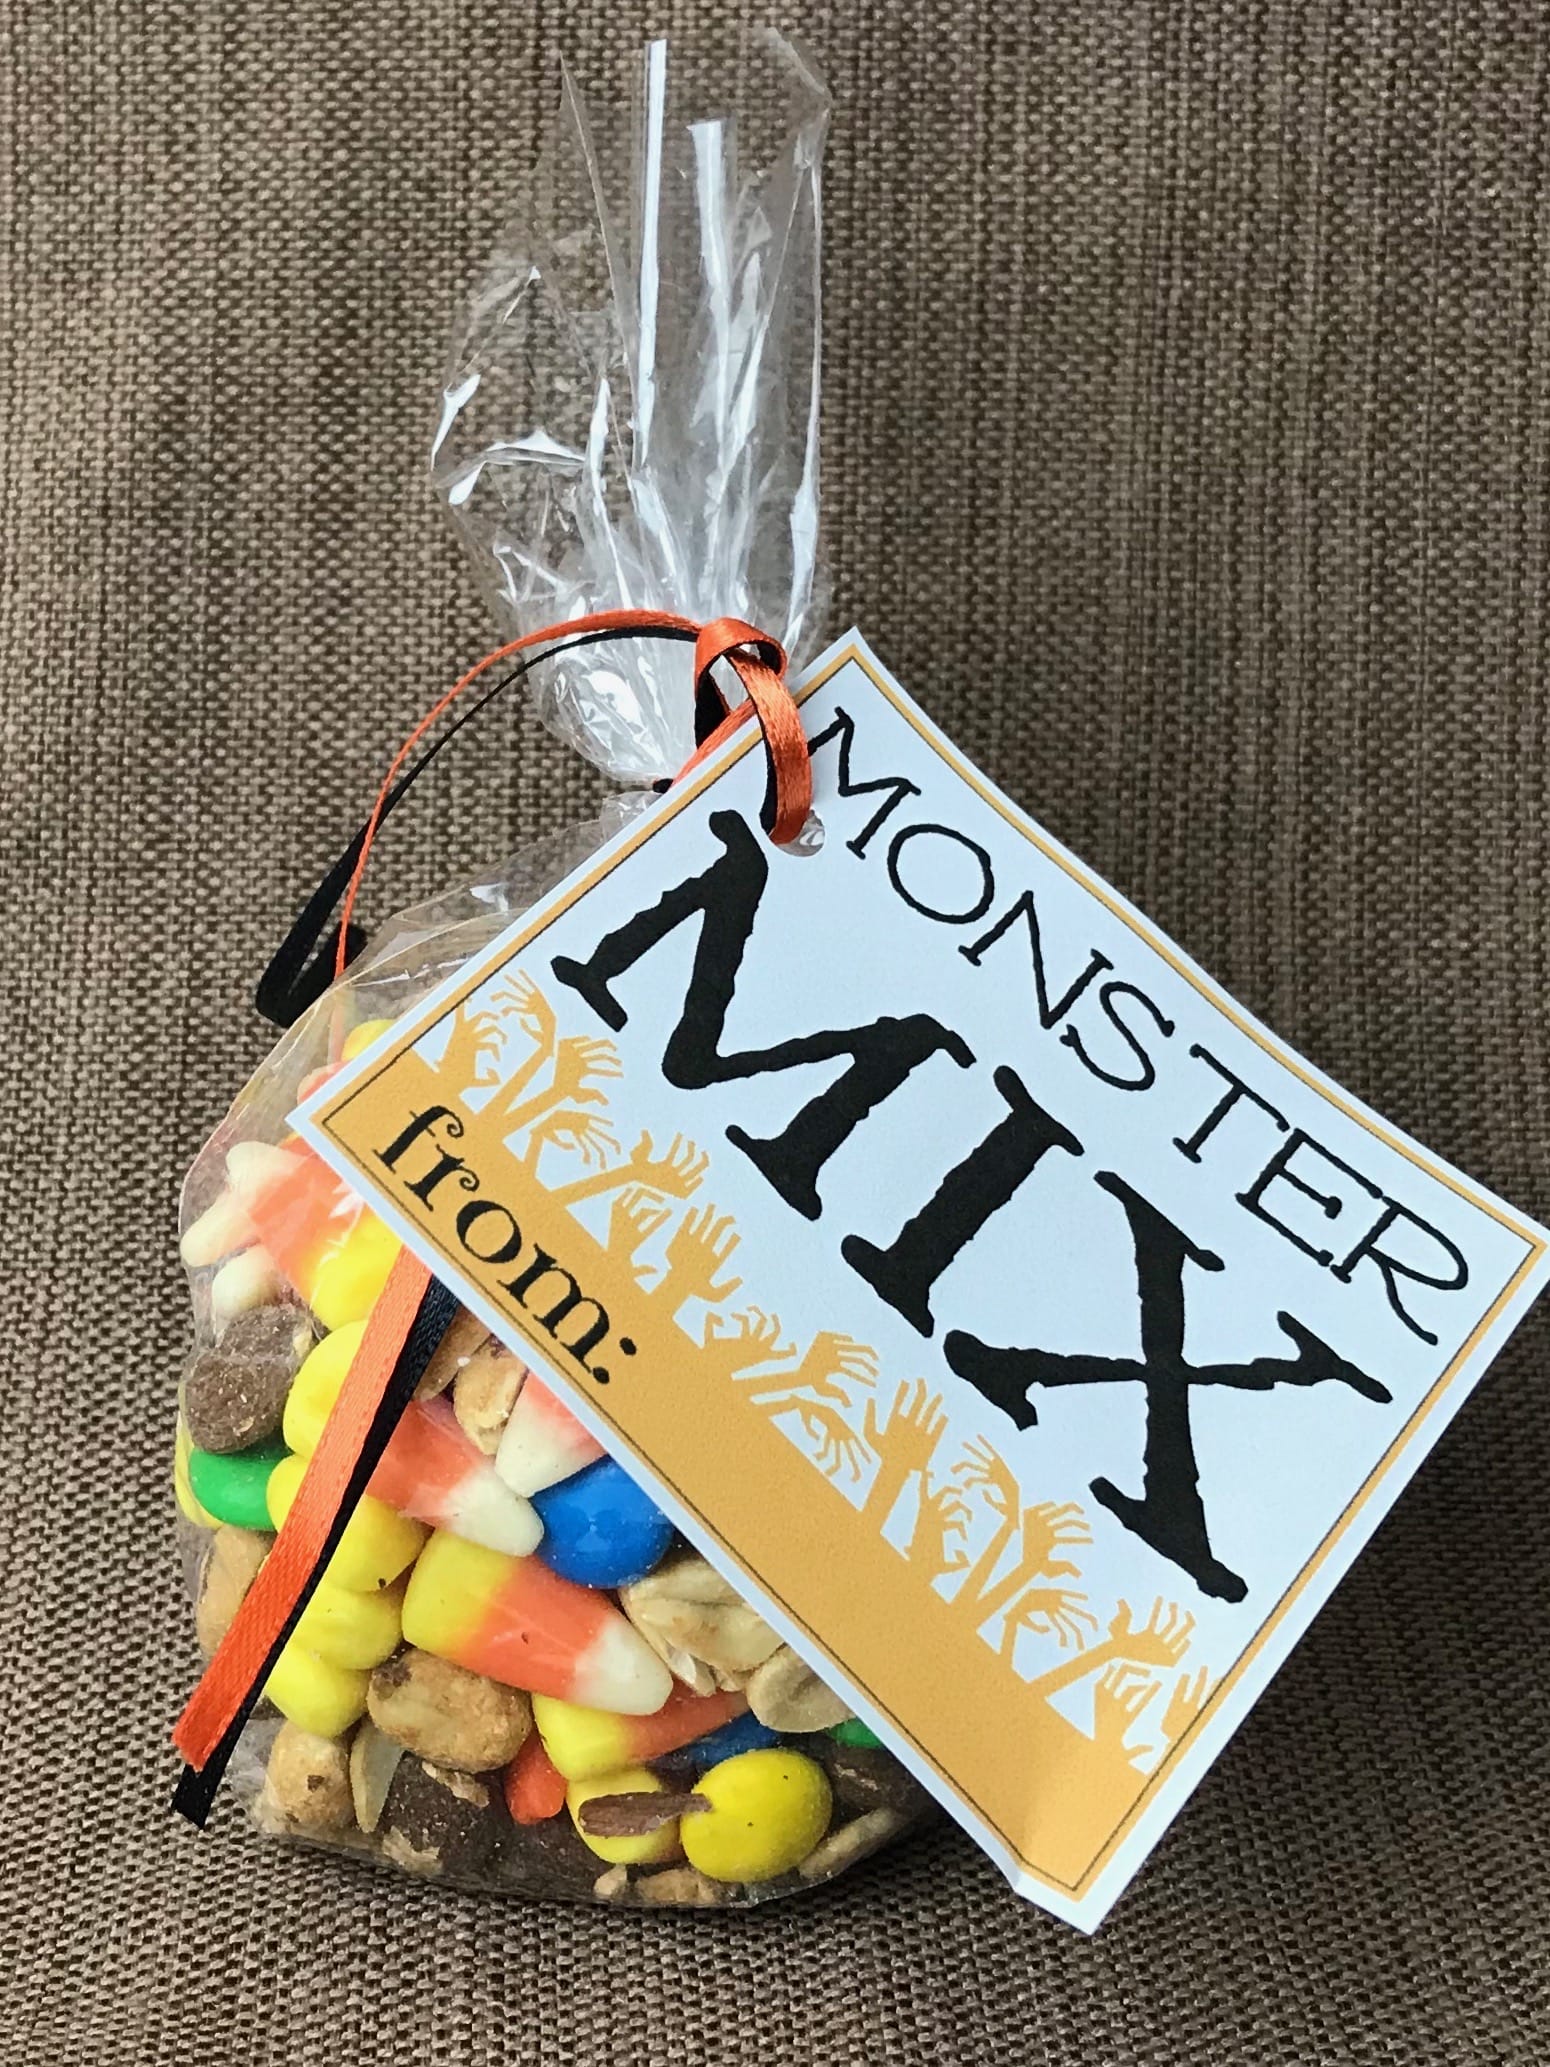 Halloween goodie bags are a great idea for a Halloween party for kids. Whether it is at school or with an organization, kids get excited about goodie bags. Use these Halloween printables for Halloween gift giving.